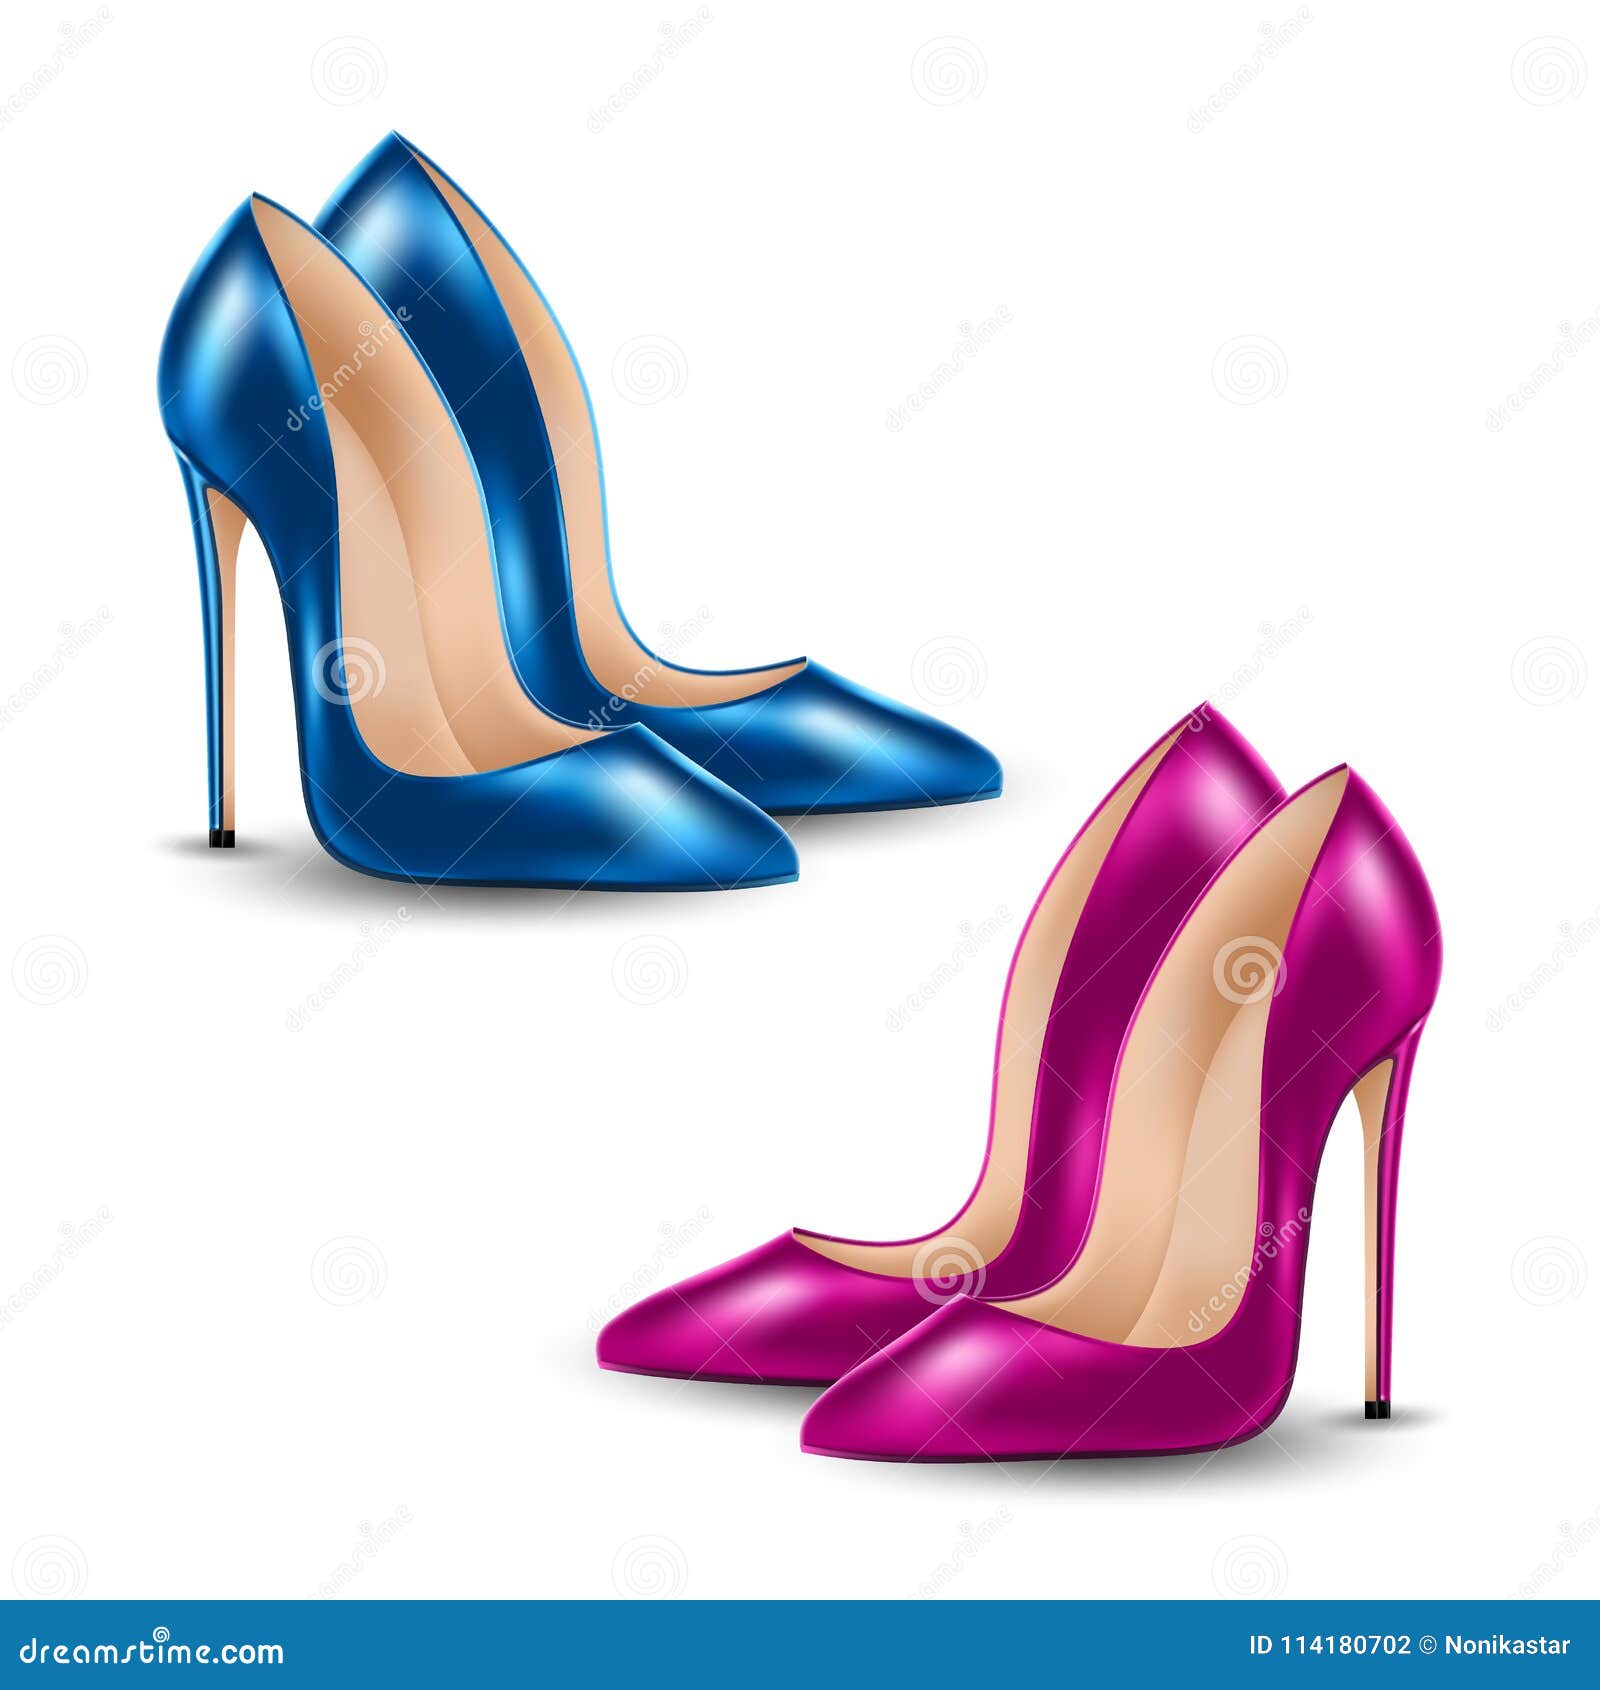 Classic Heels High Shoes Template Stock Illustrations – 20 For High Heel Shoe Template For Card